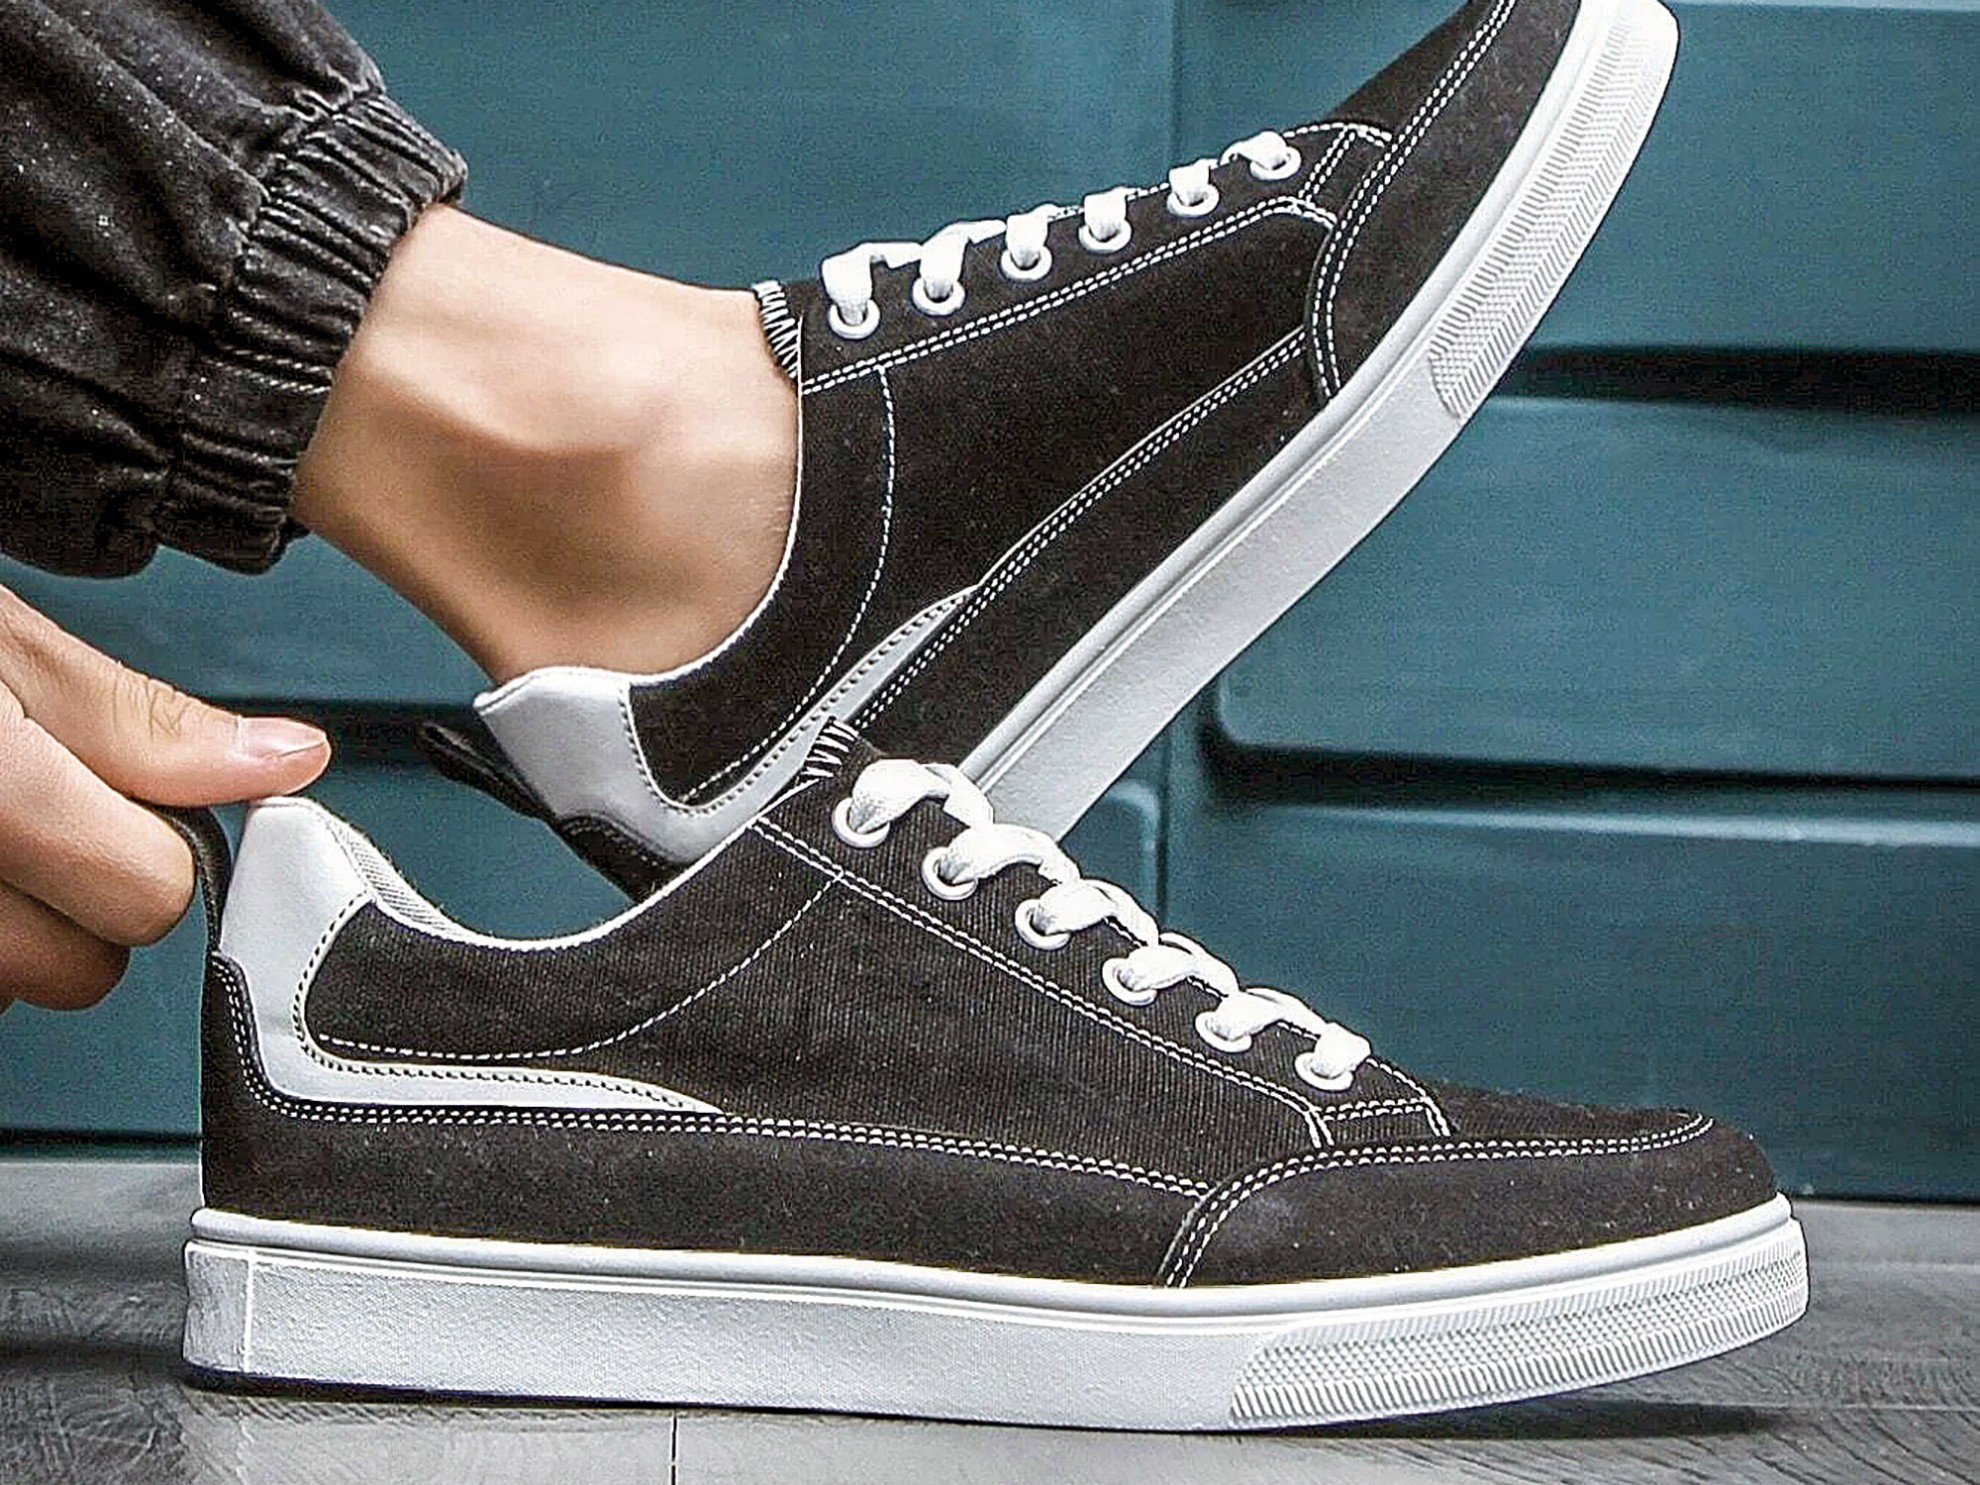 Classic sneaker: With more aesthetic content